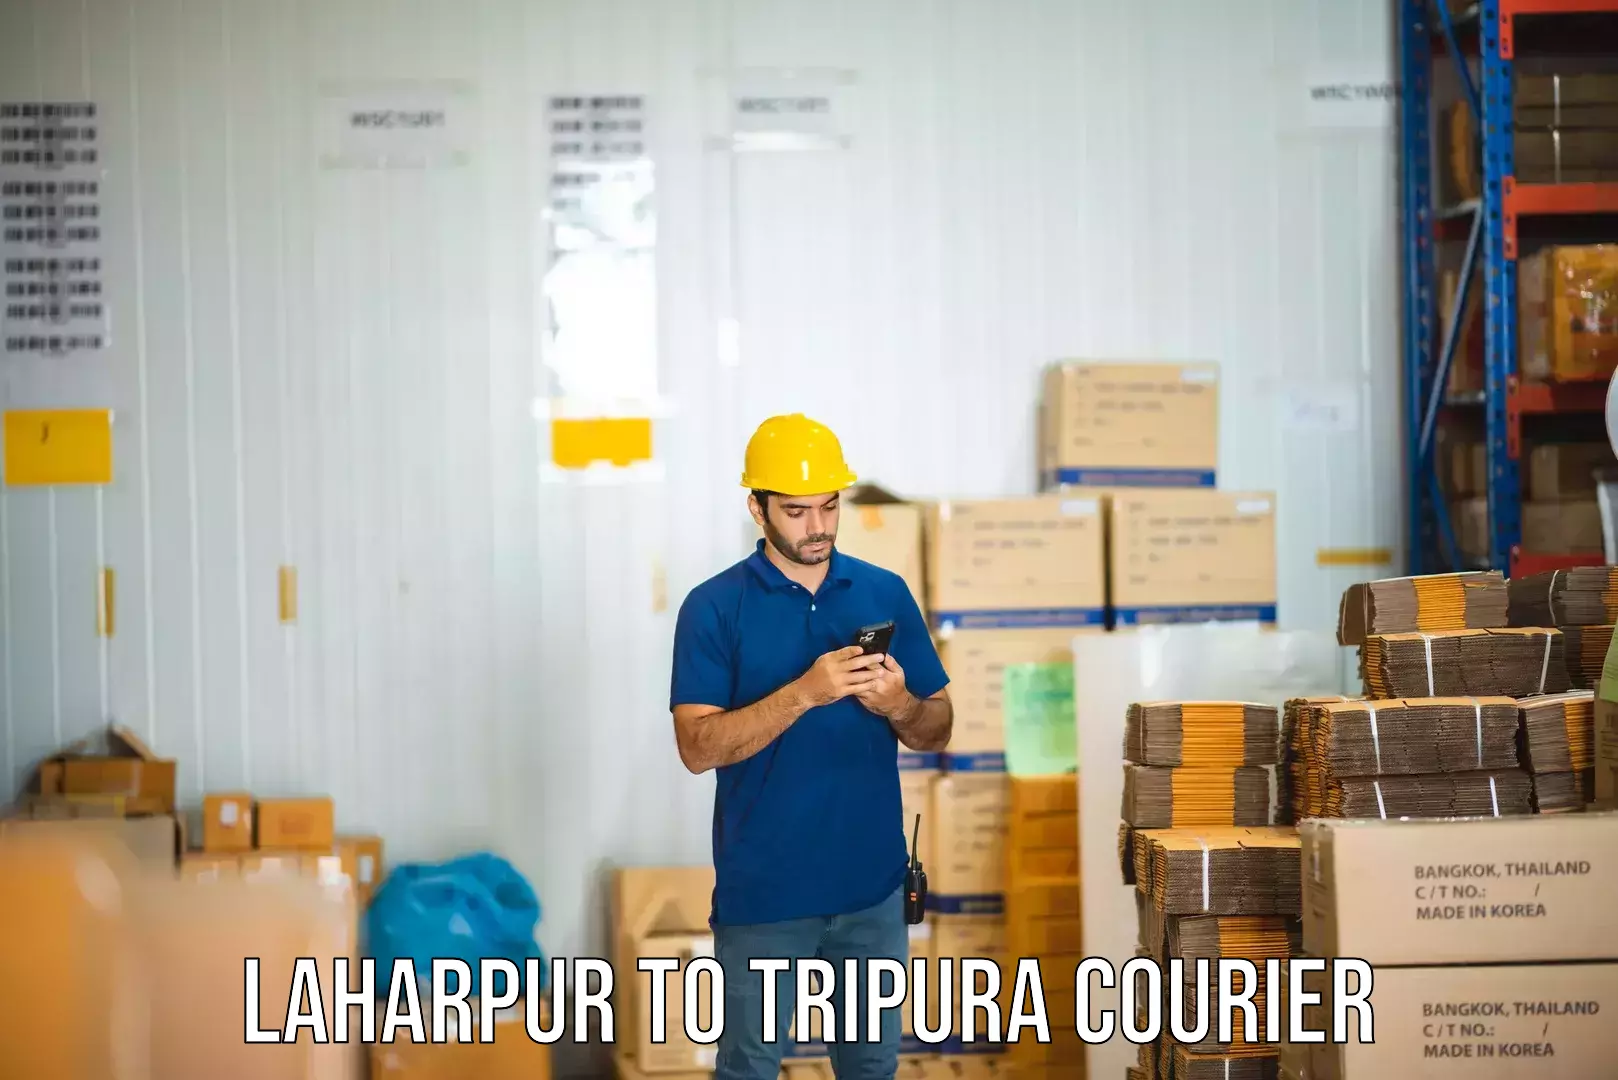 Multi-national courier services Laharpur to Udaipur Tripura